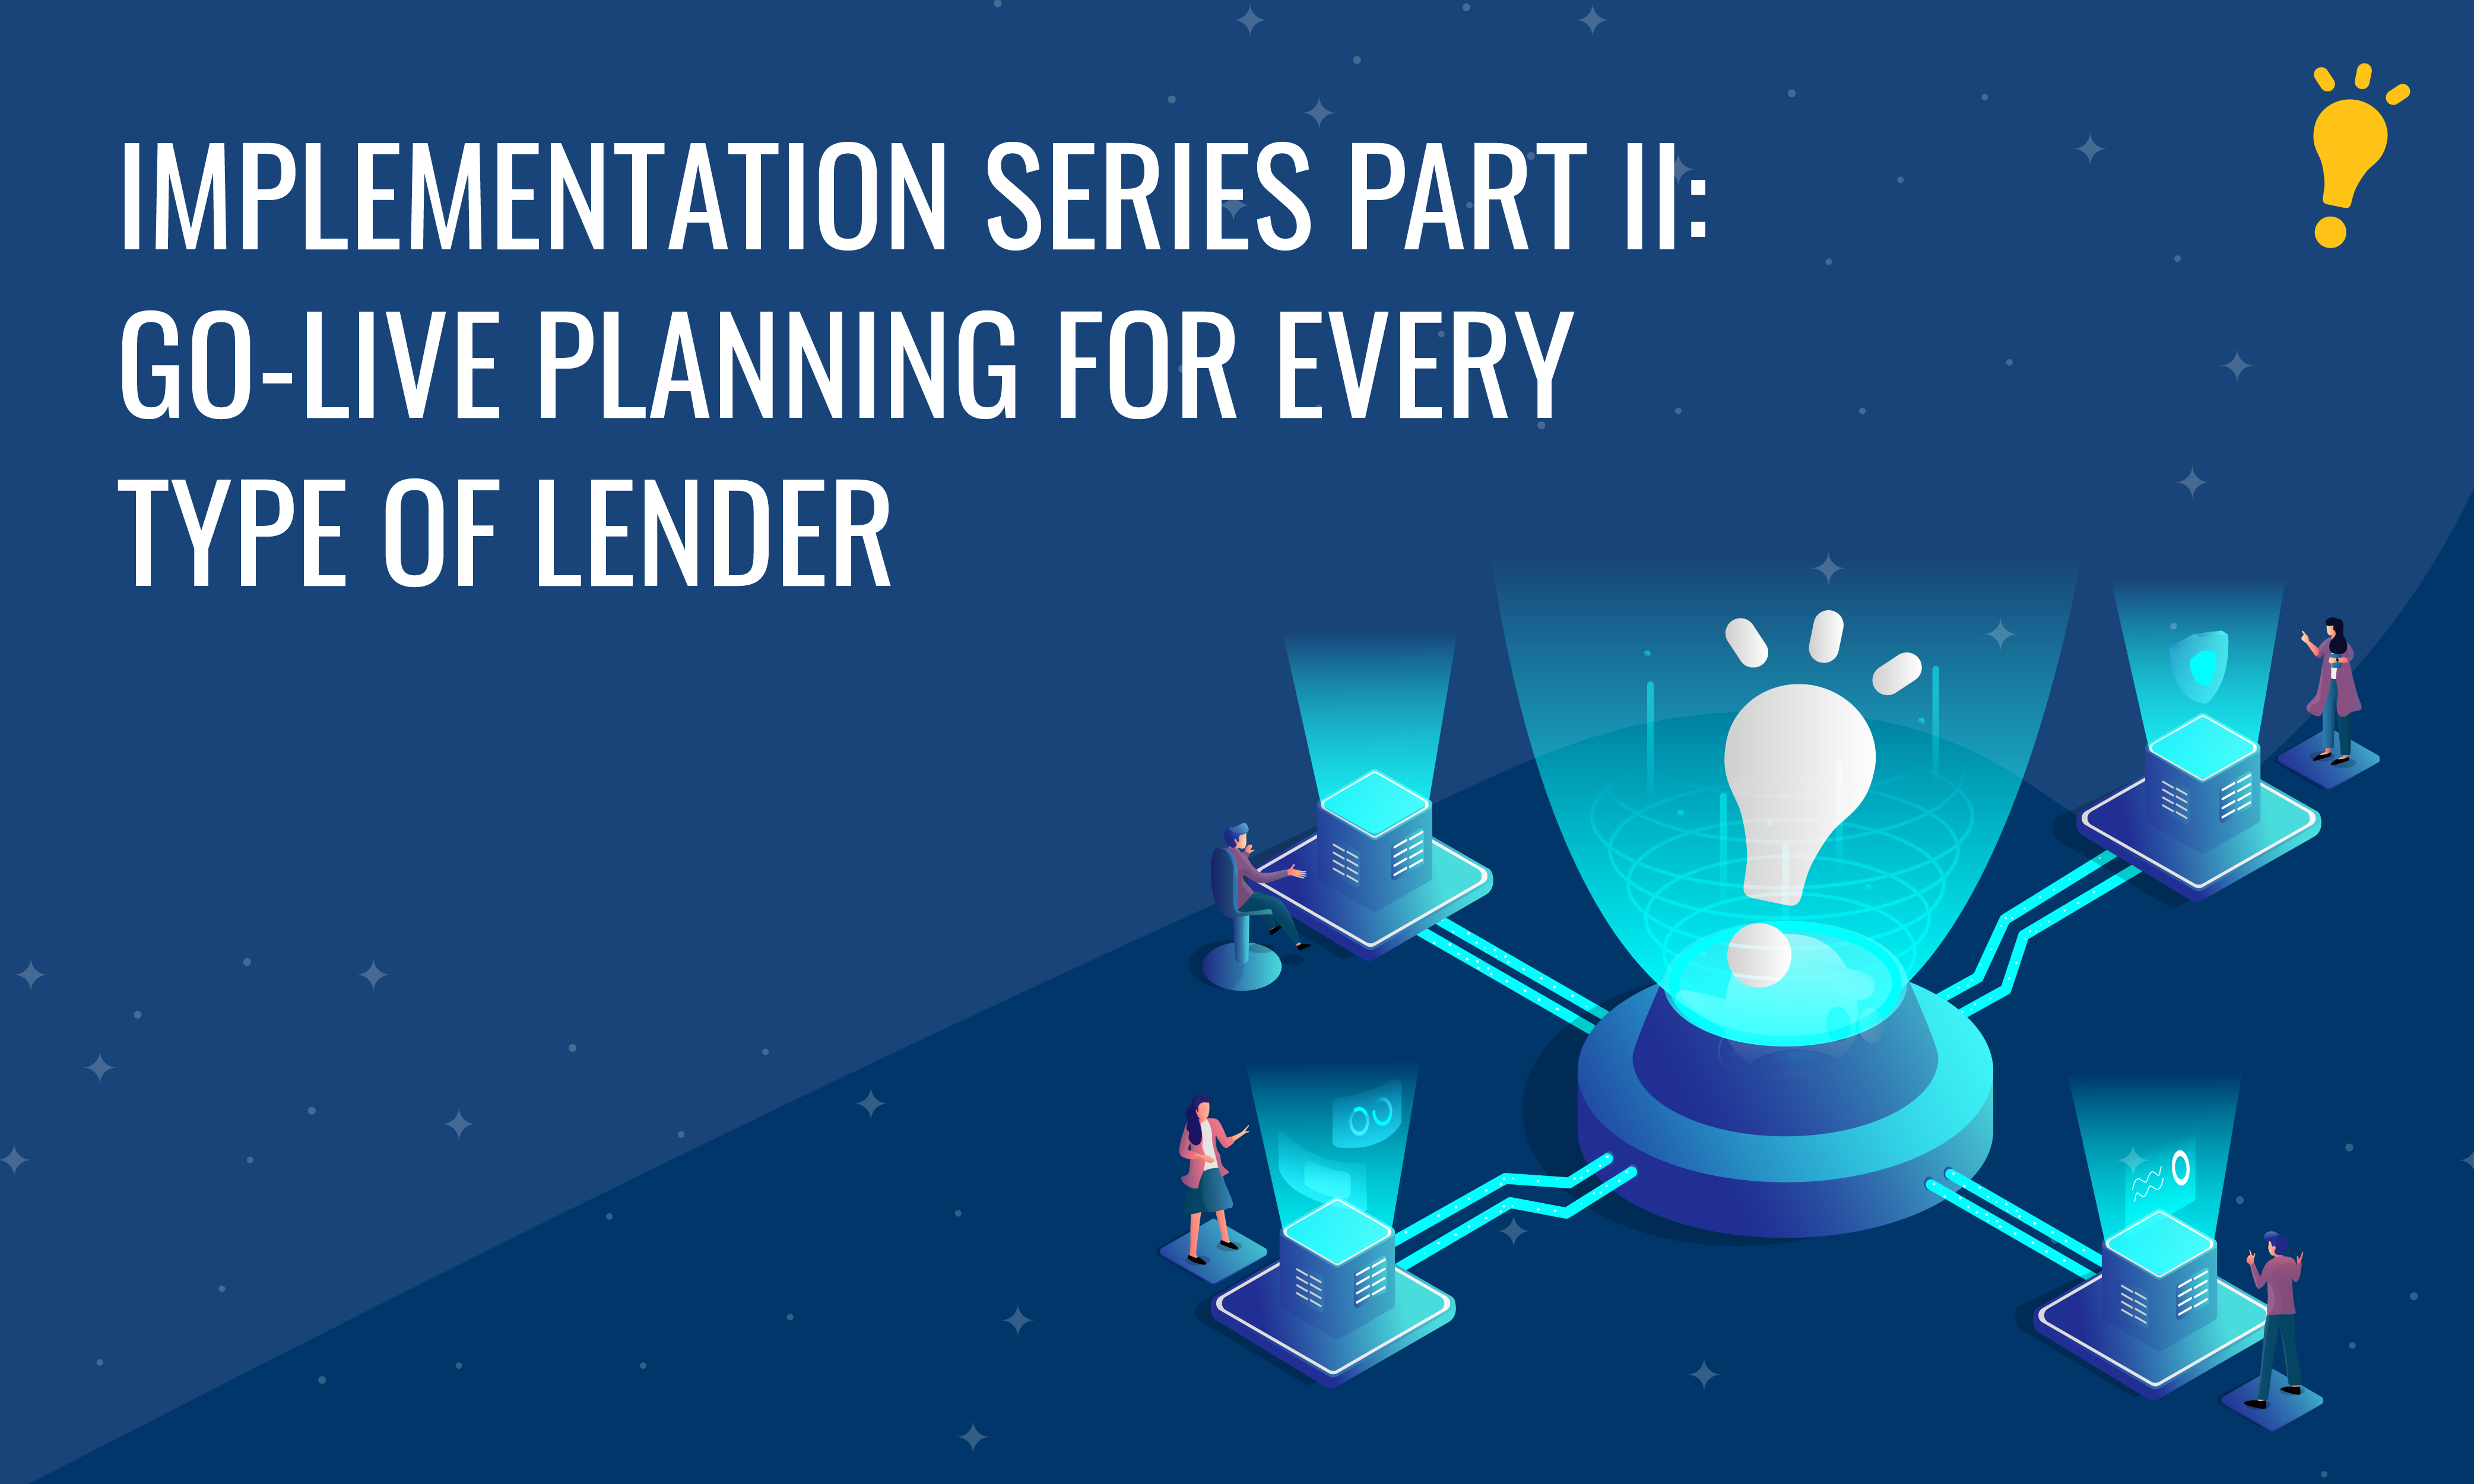 Implementation Series Part II: Go-Live Planning for Every Type of Lender